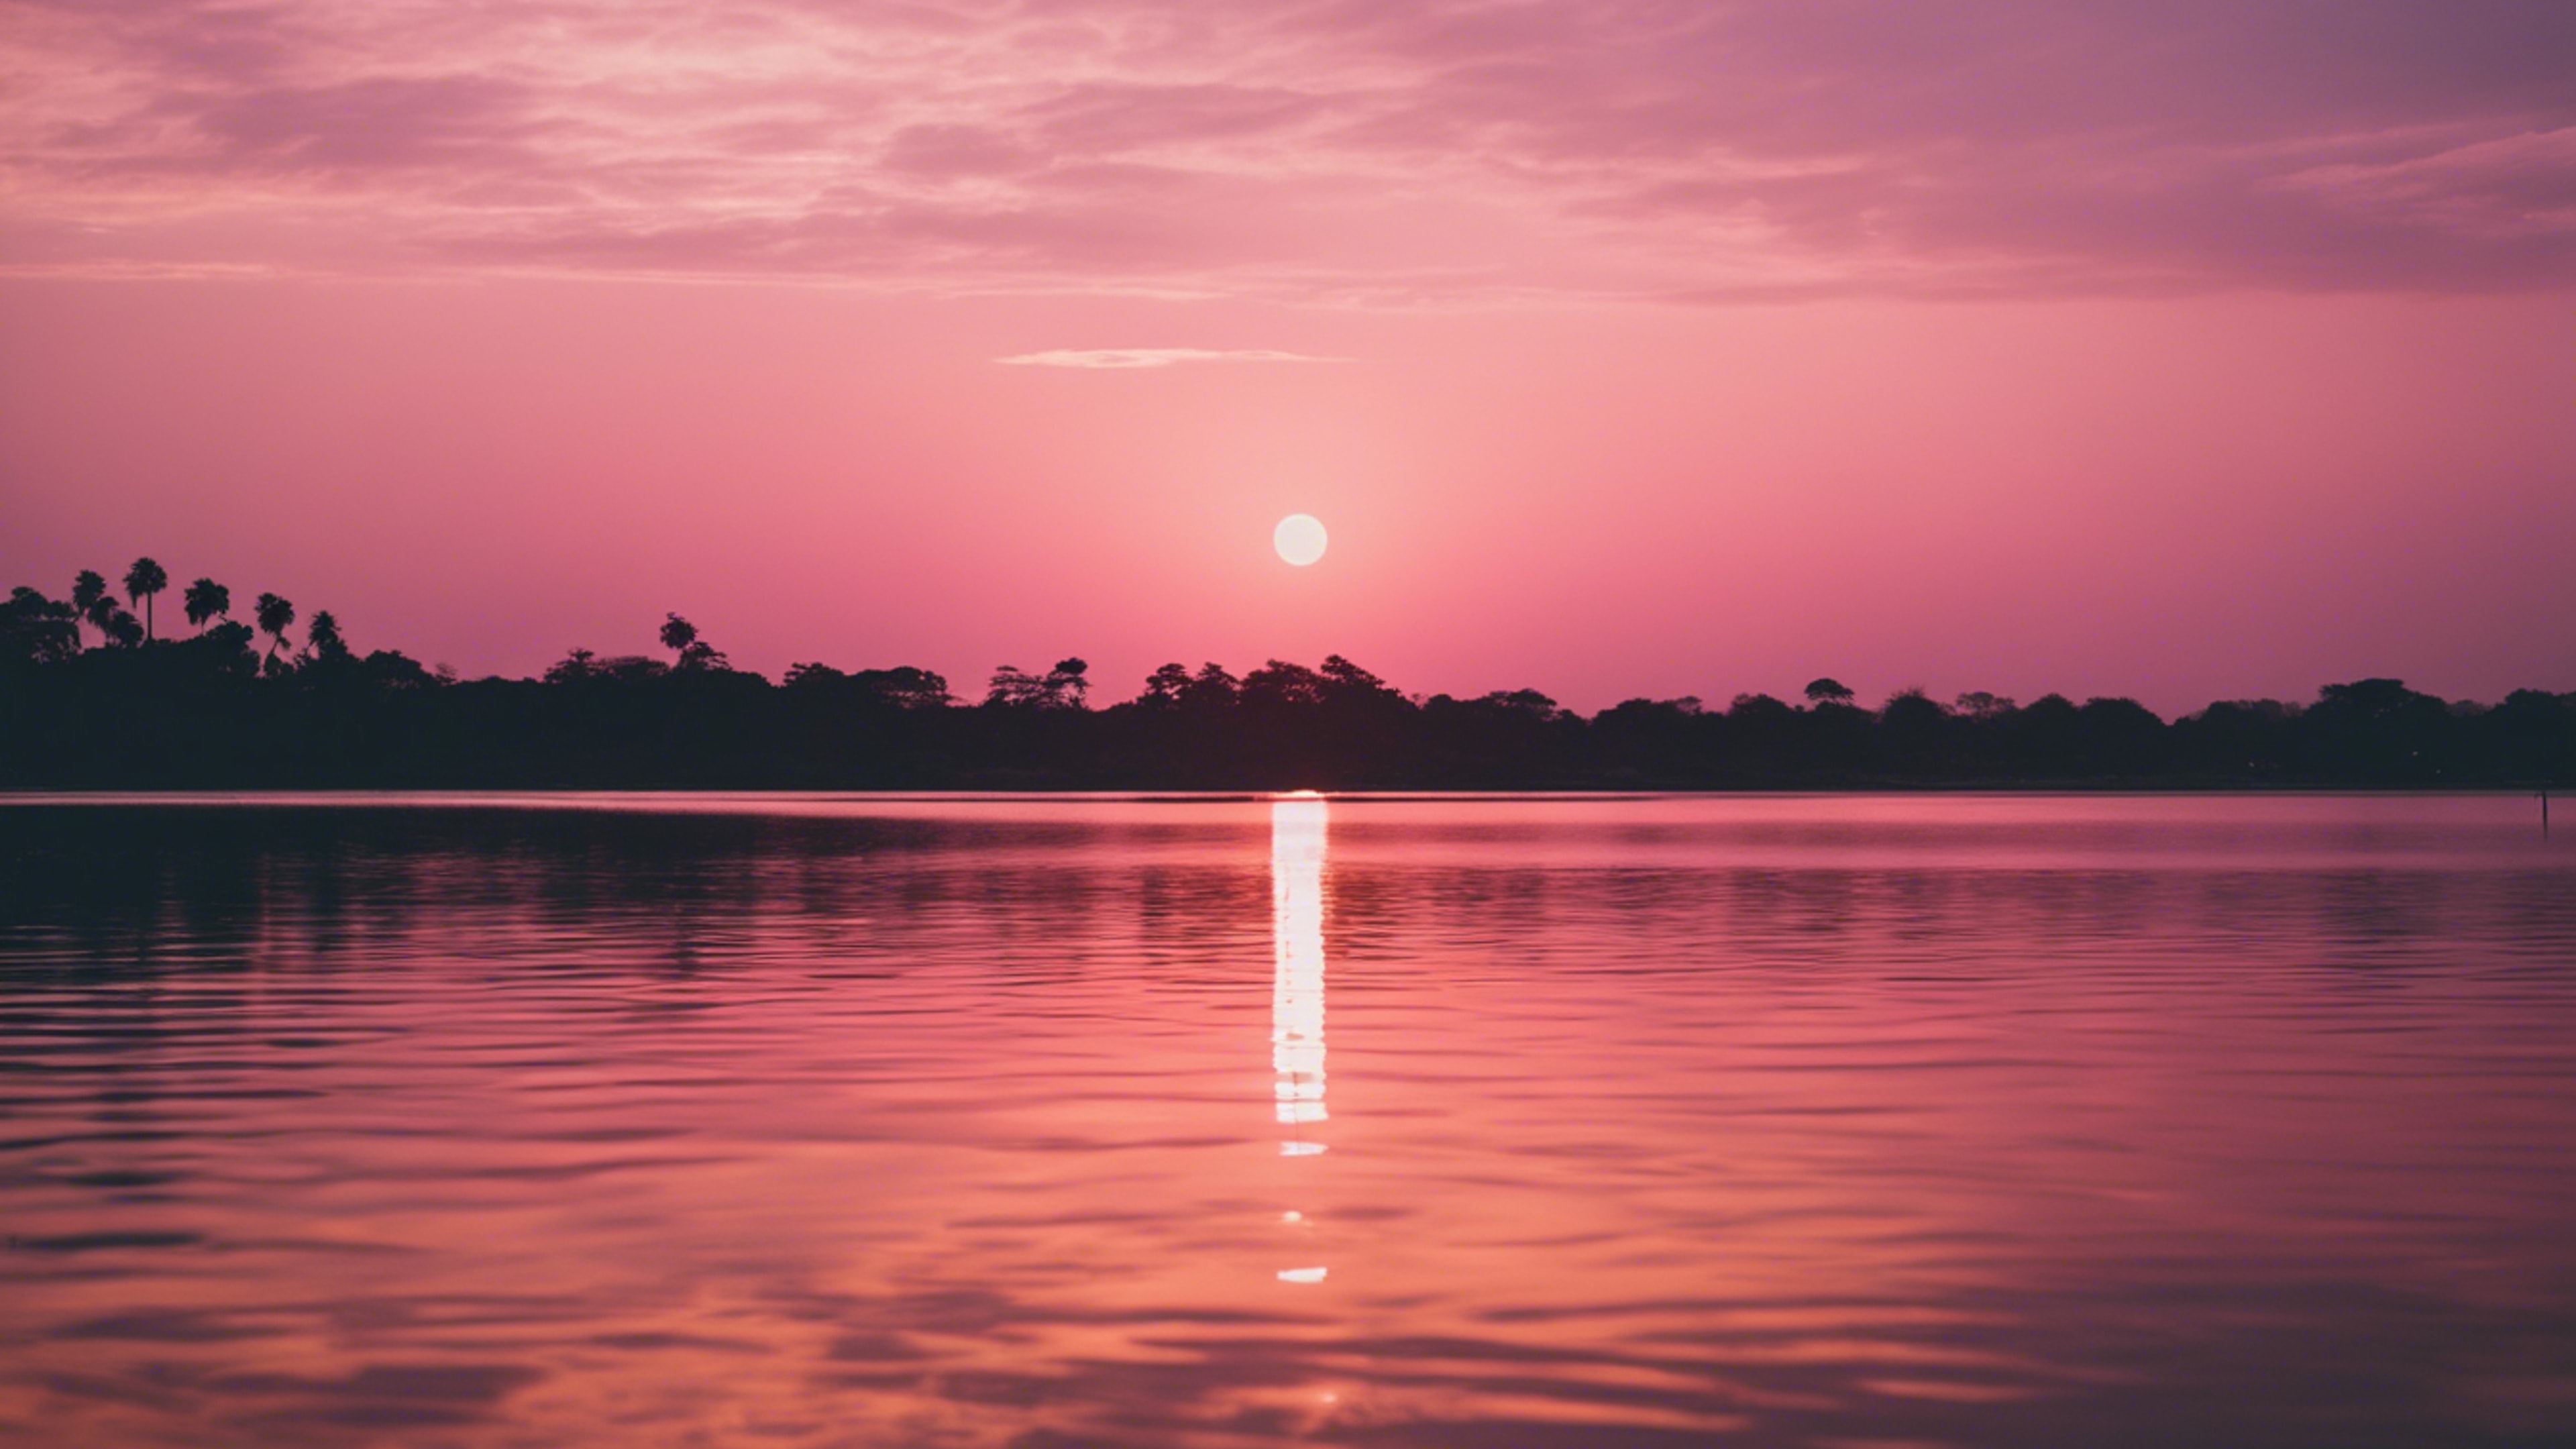 A picturesque pink and gold sunset reflecting on tranquil lagoon waters. Wallpaper[938883e46b5847a4931b]